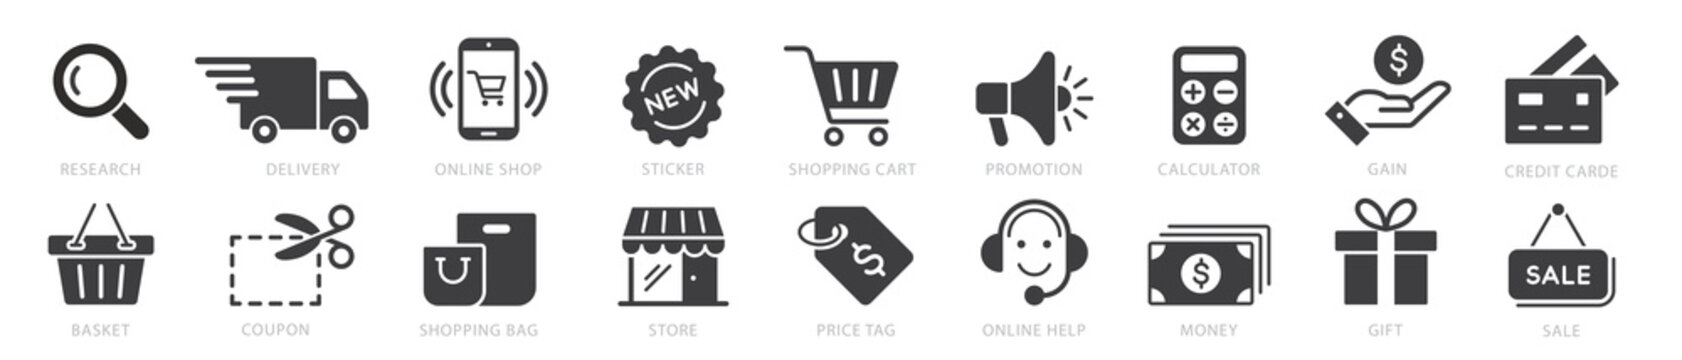 Online Shopping Icons Set, Payment Elements Vector Illustration